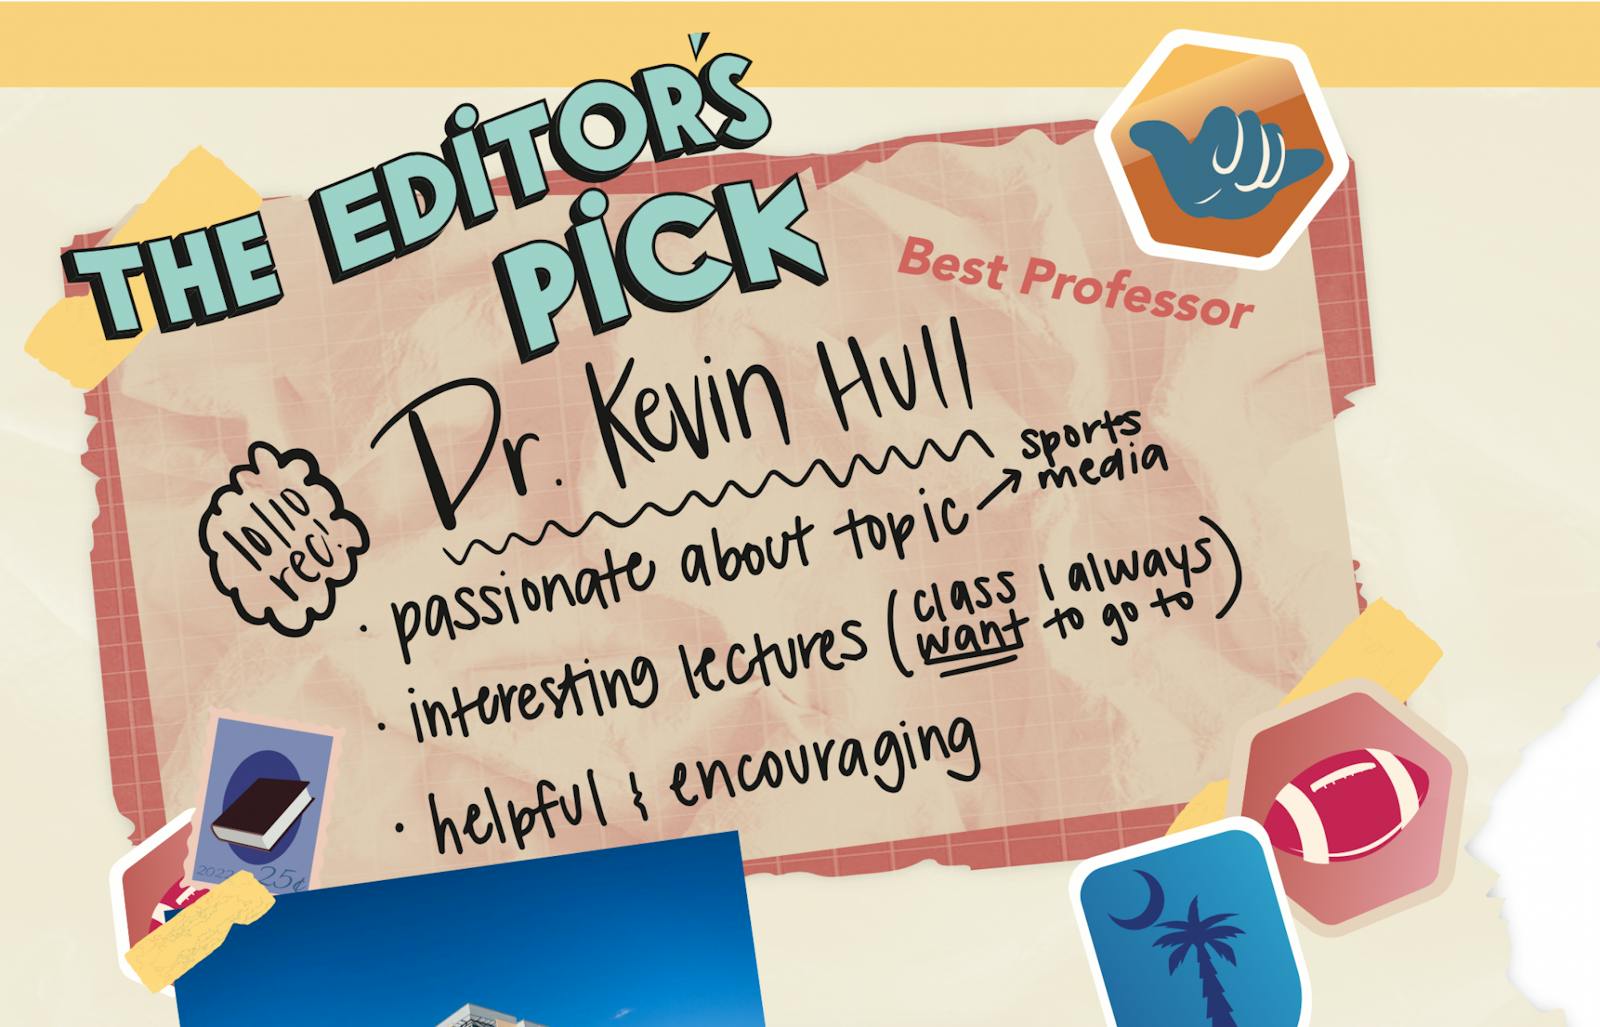 Photo for Editor's Pick, Best Professor: Dr. Kevin Hull